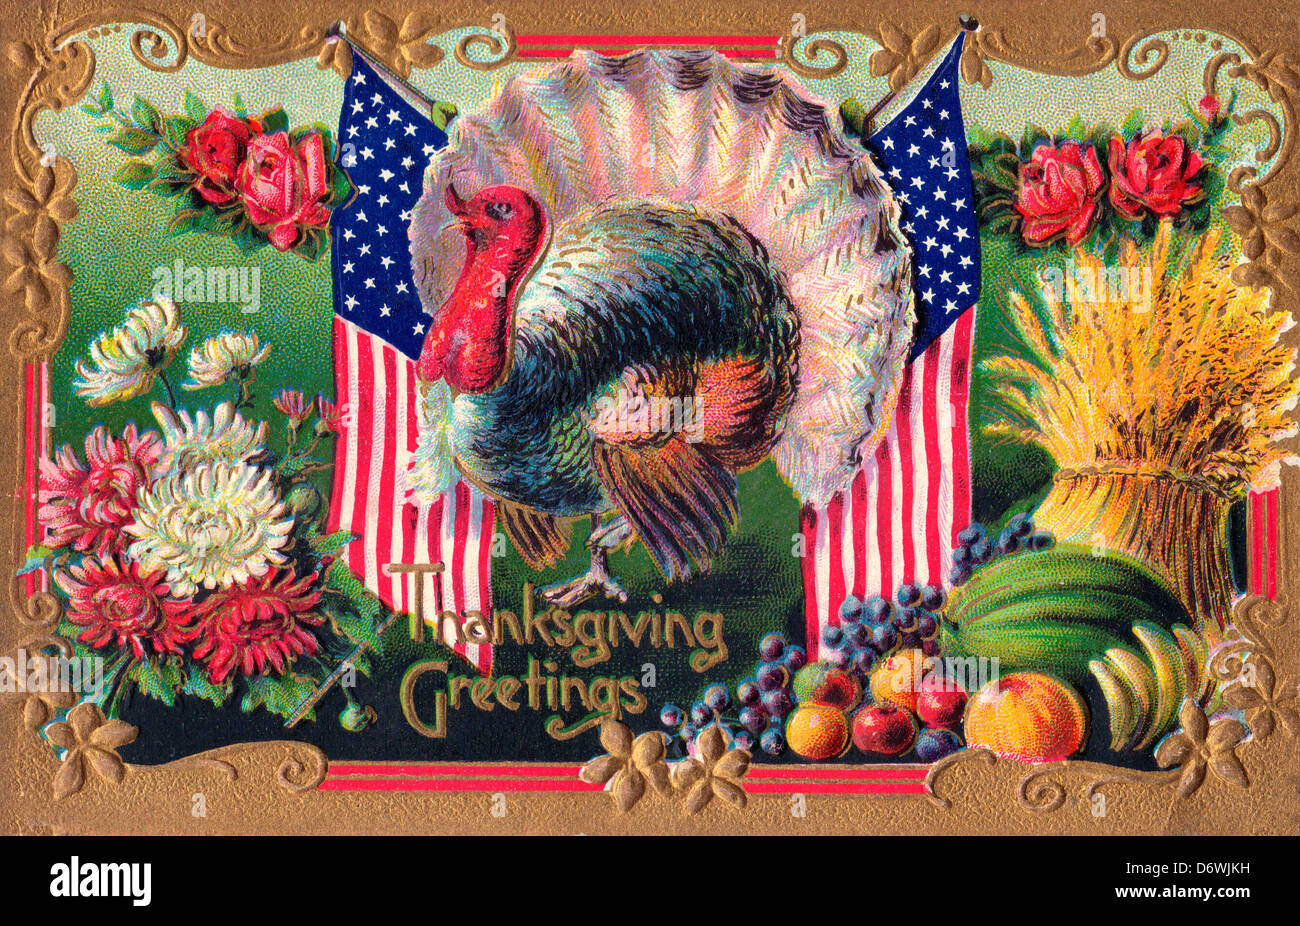 Thanksgiving Greetings - Turkey with American Flag, flowers fruits and hay Stock Photo